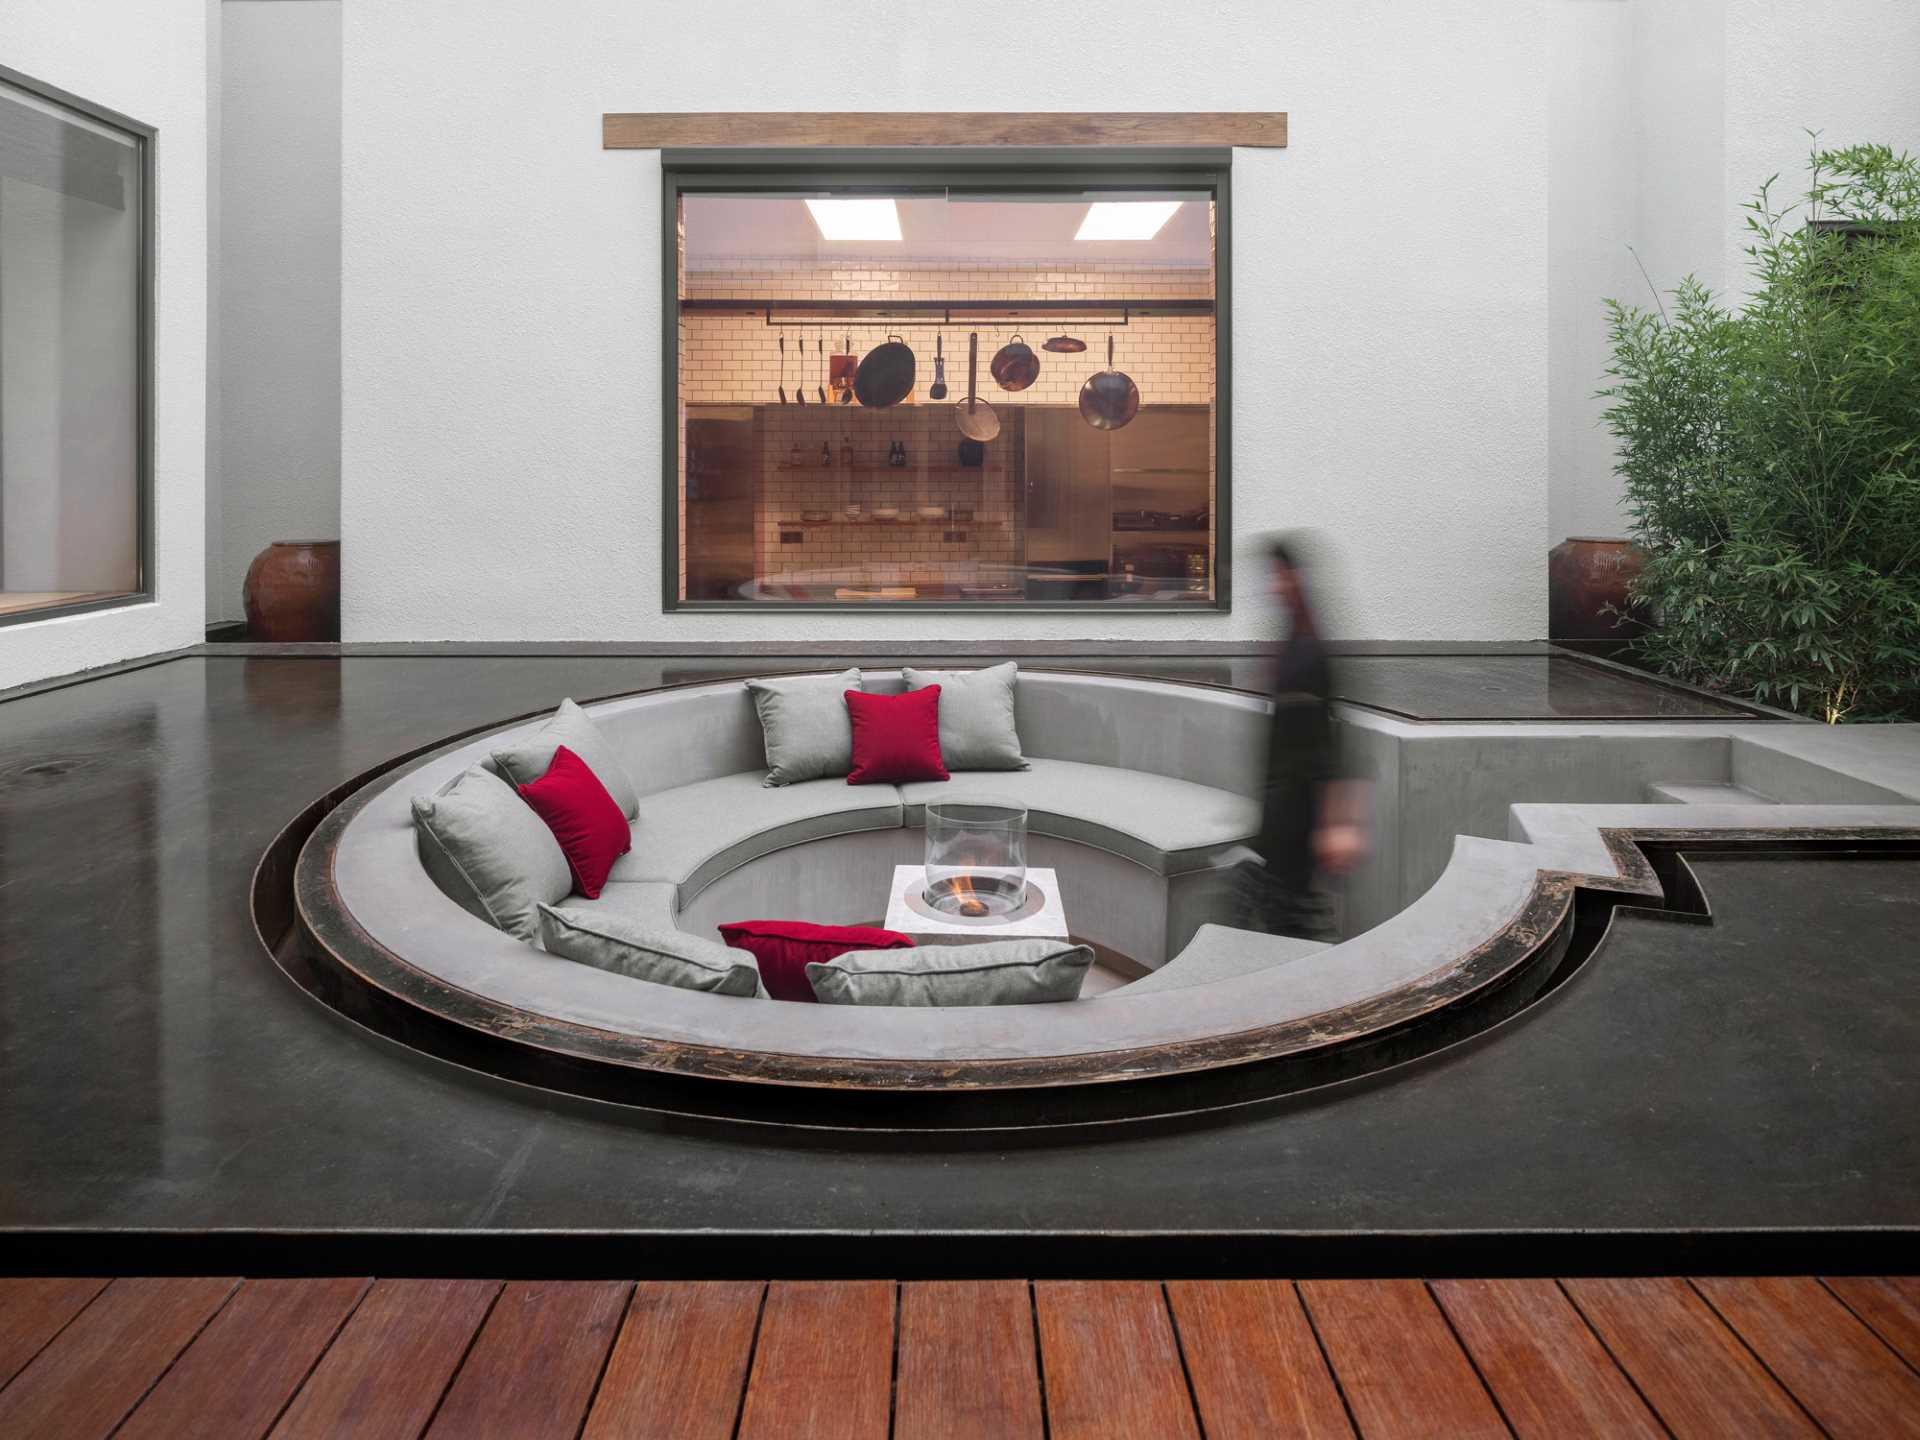 Hidden away from public view, but still visible from many areas of the home, this sunken conversation pit was created as a place for the family to gather and entertain.